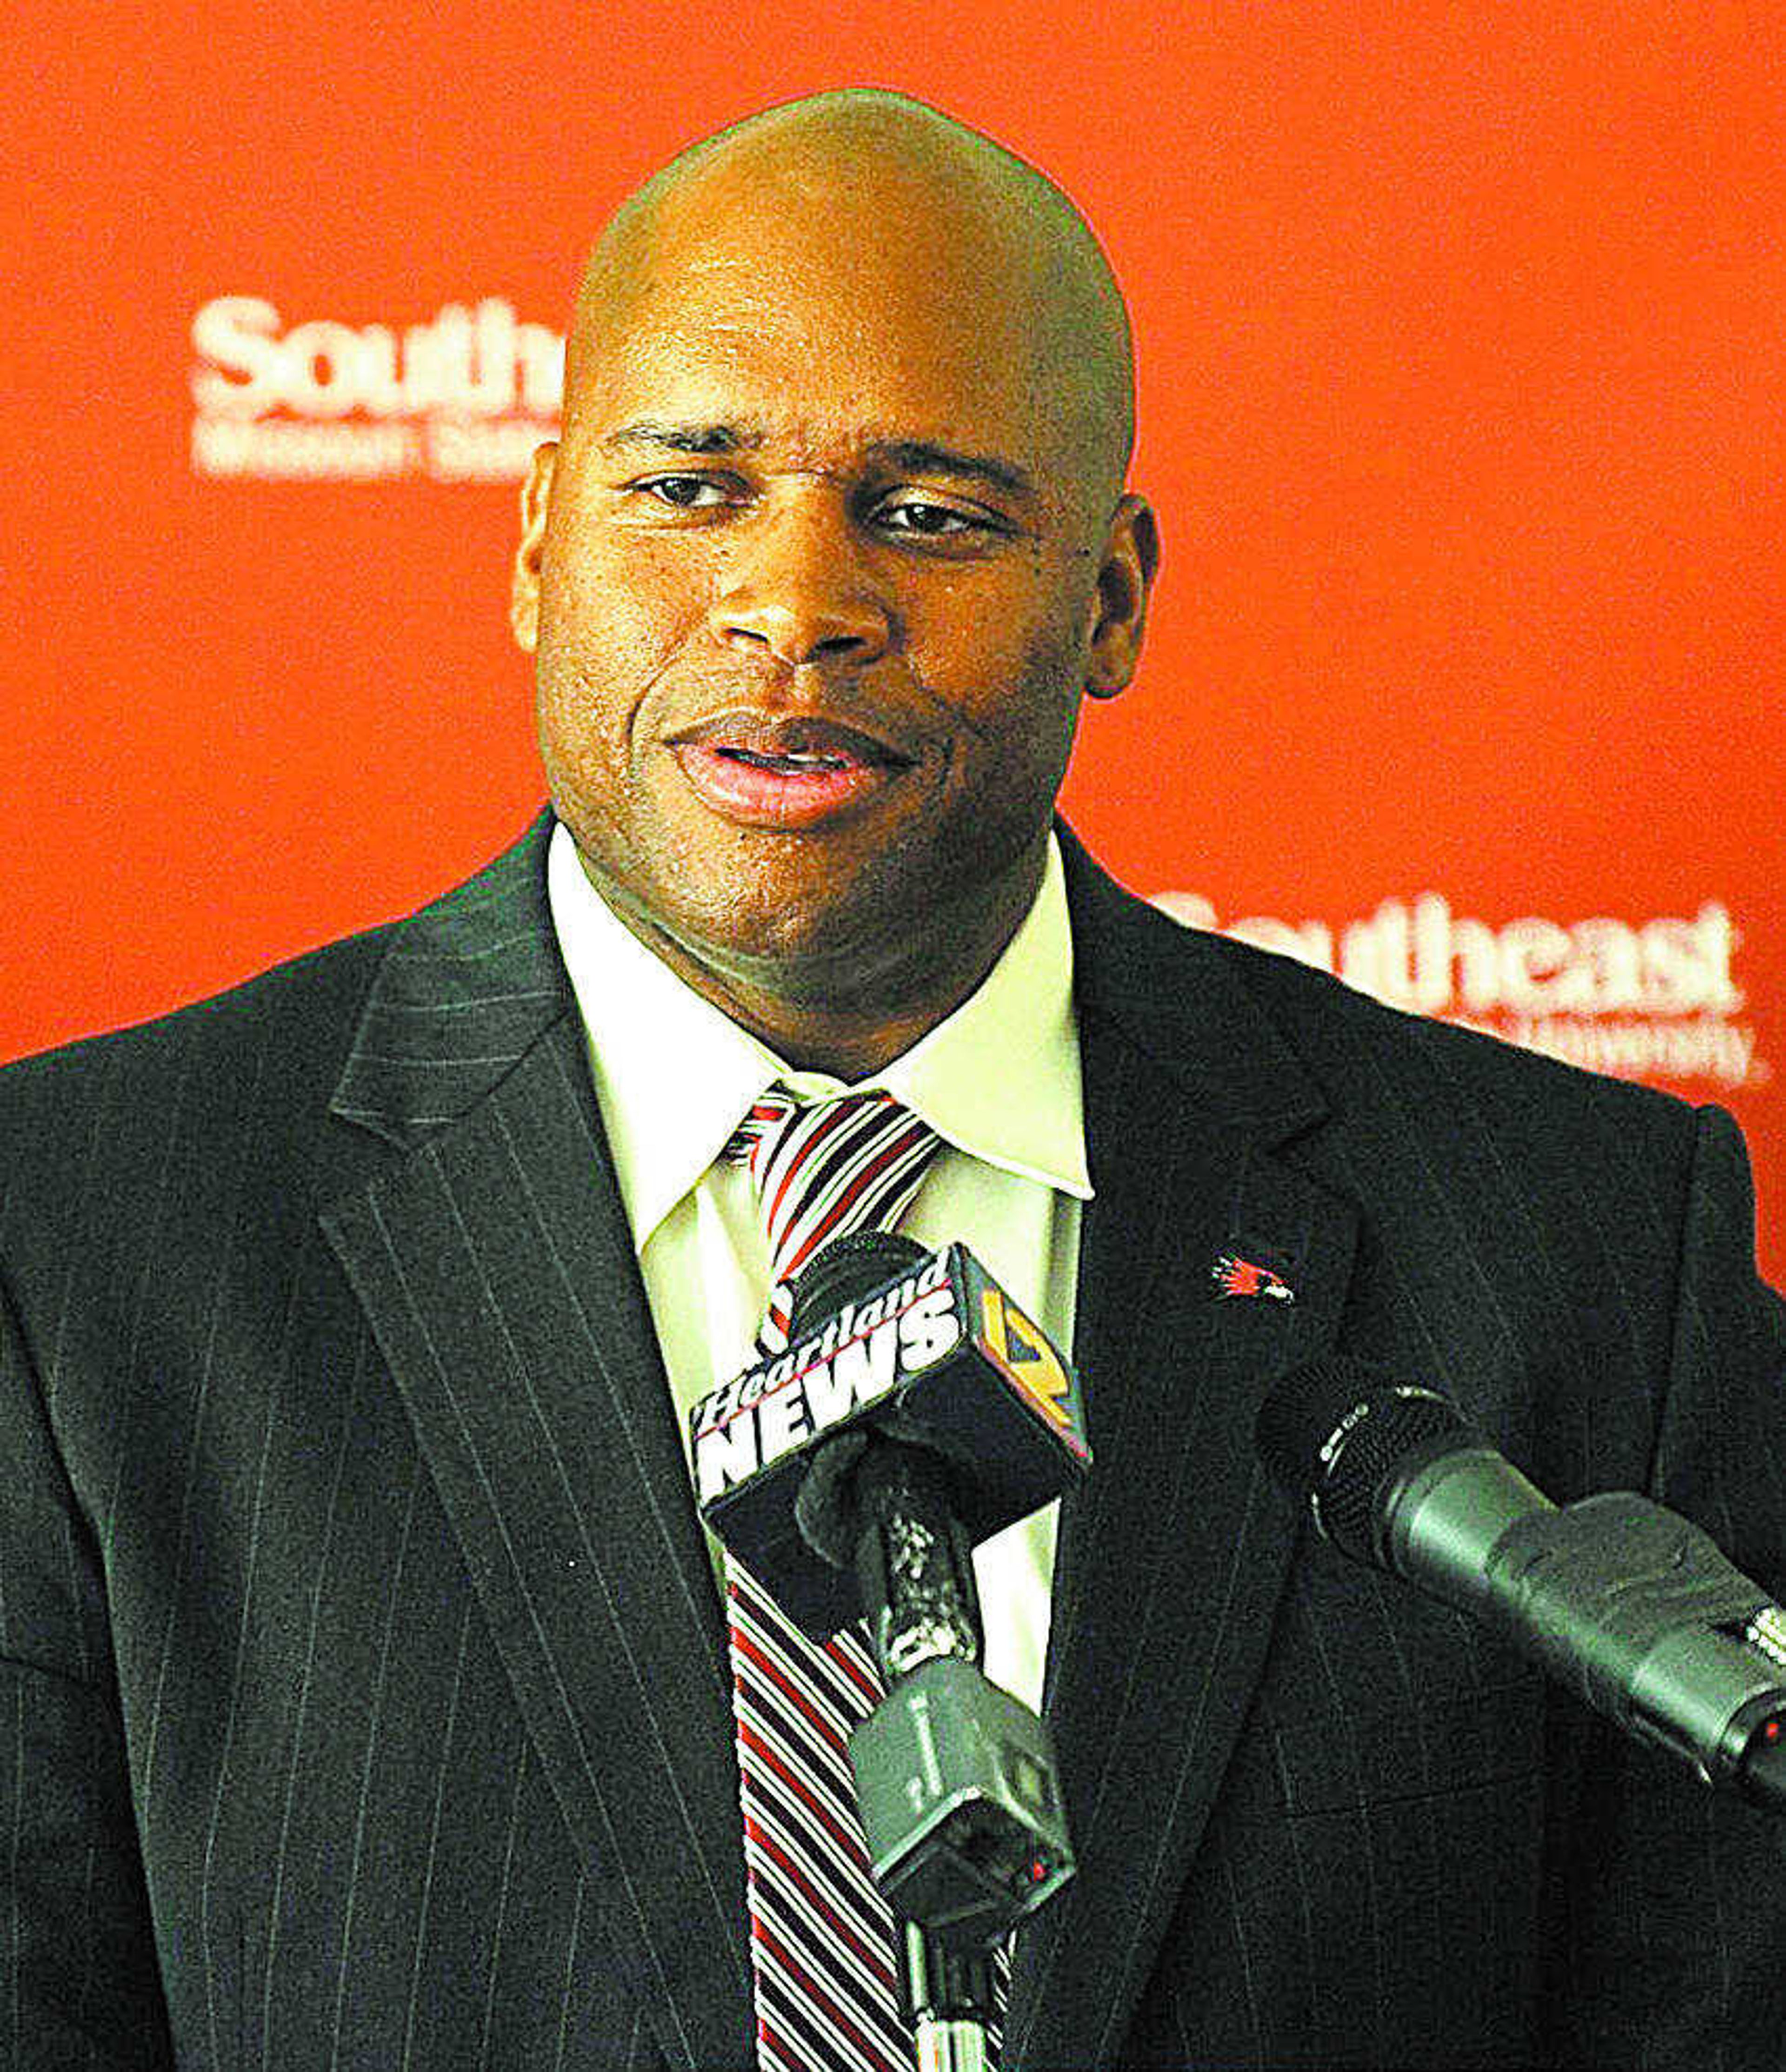 Southeast named Mark Alnutt its new athletics director at a press conference on Thursday.